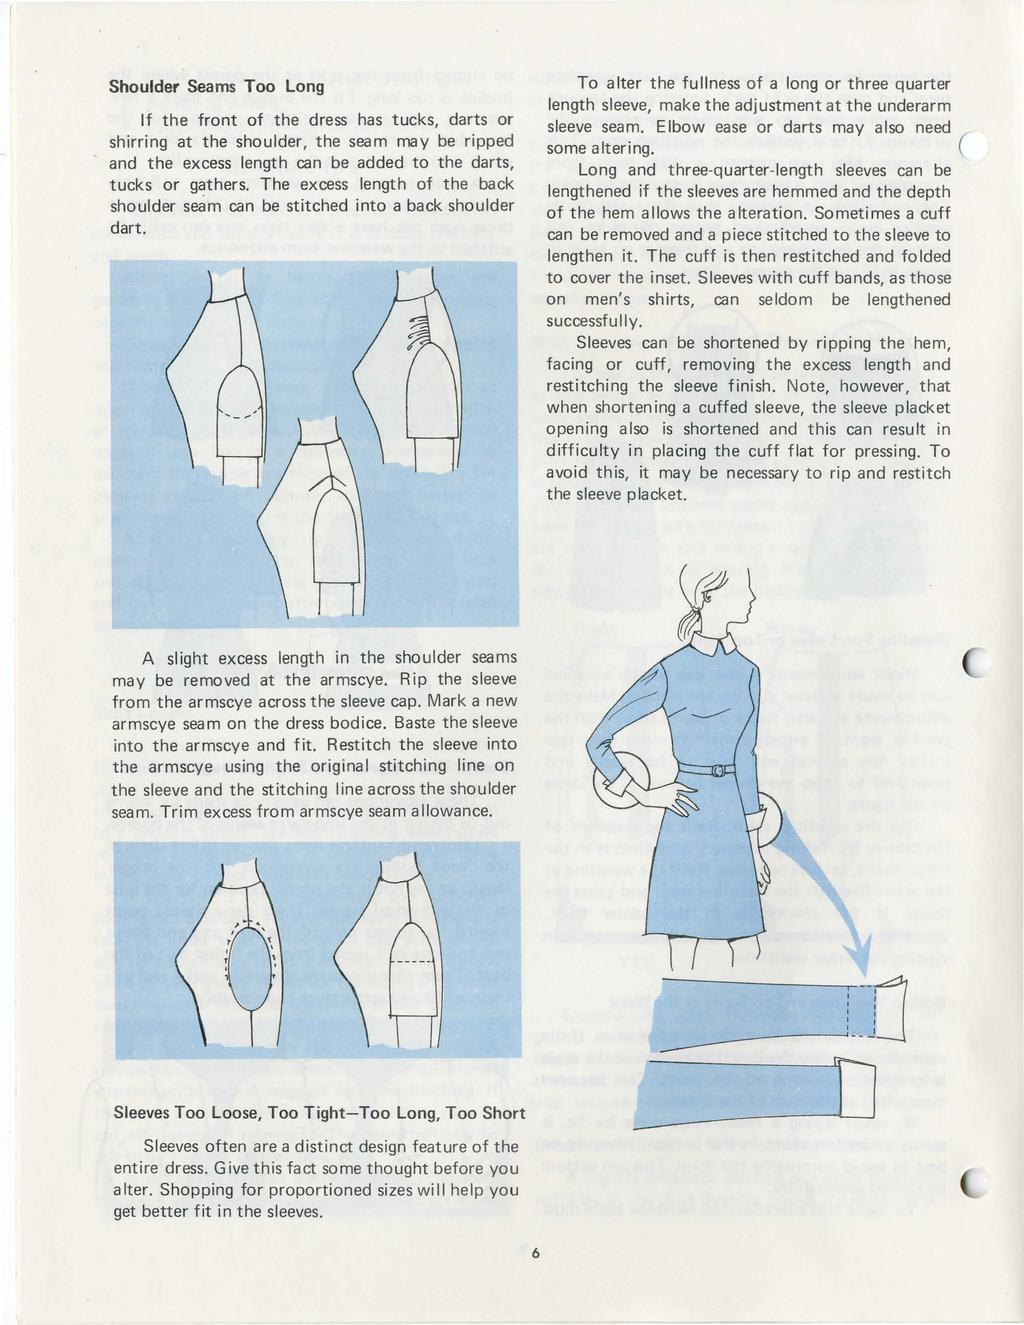 Shoulder Seams Too Long f the front of the dress has tucks, darts or shirring at the shoulder, the seam may be ripped and the excess length can be added to the darts, tucks or gathers.